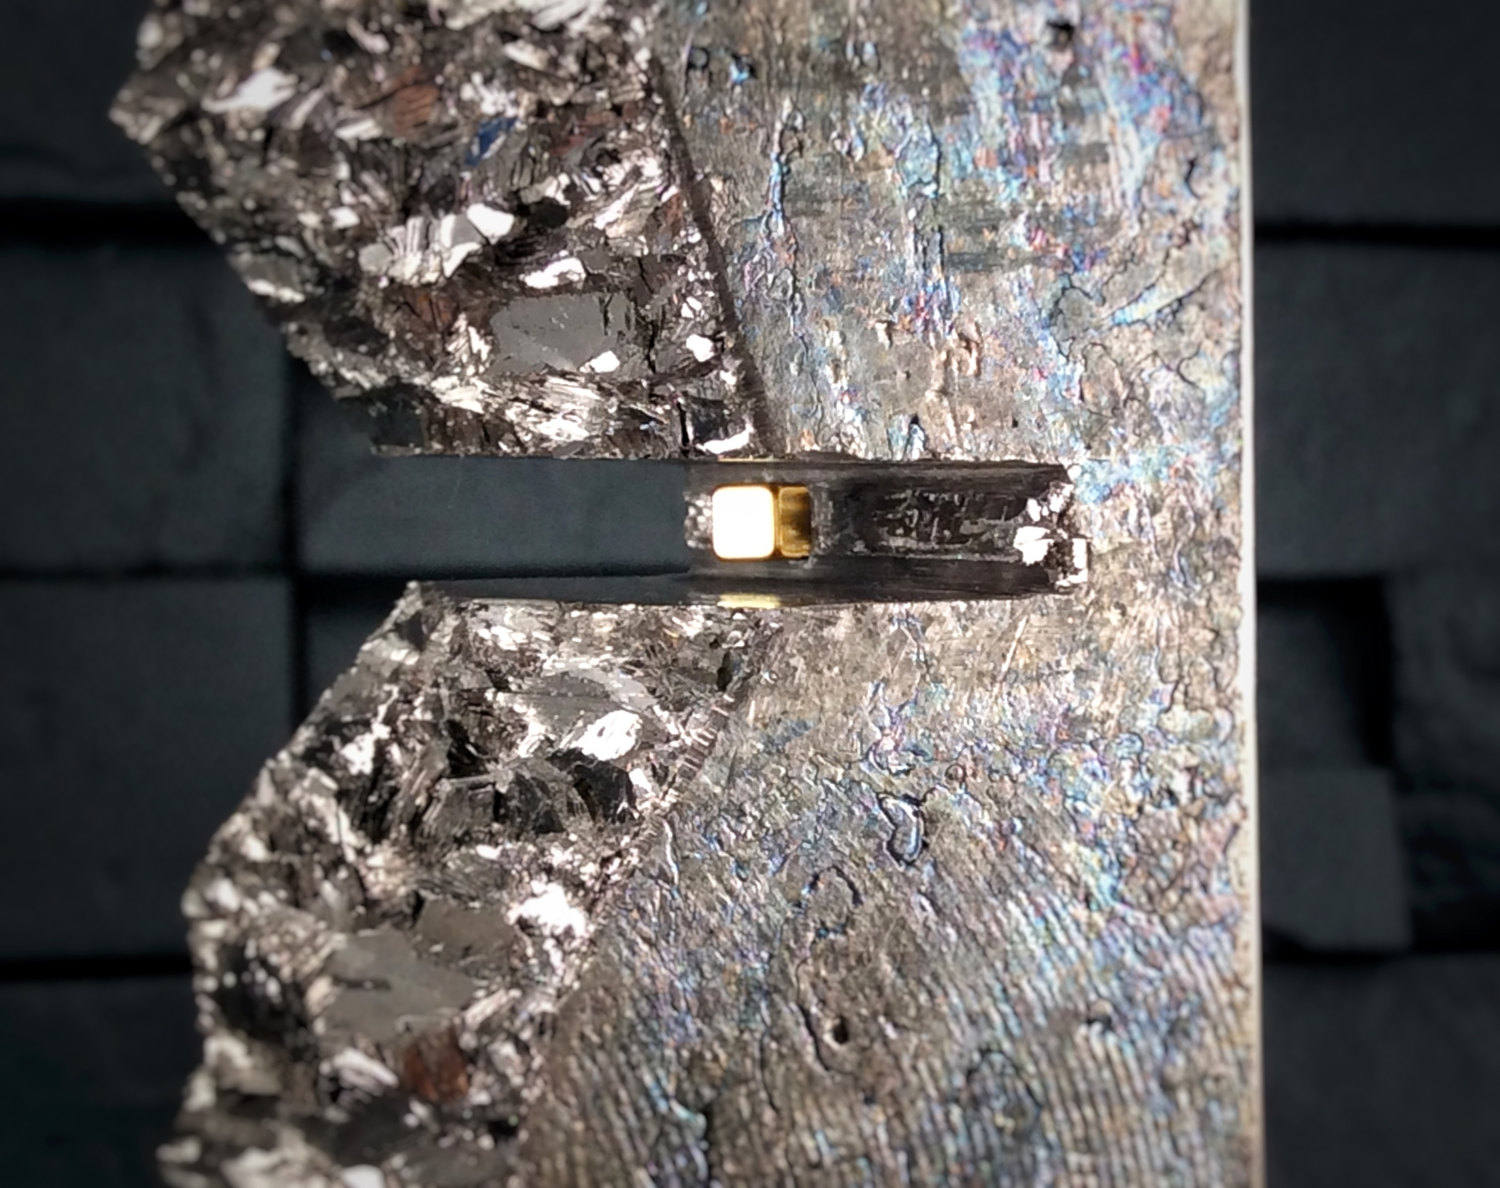 Bismuth Monolith Magnetic / Diamagnetic Levitation - Kinetic Sculpture - Physics Gift for Science Geek - Executive Desk or Office Decor